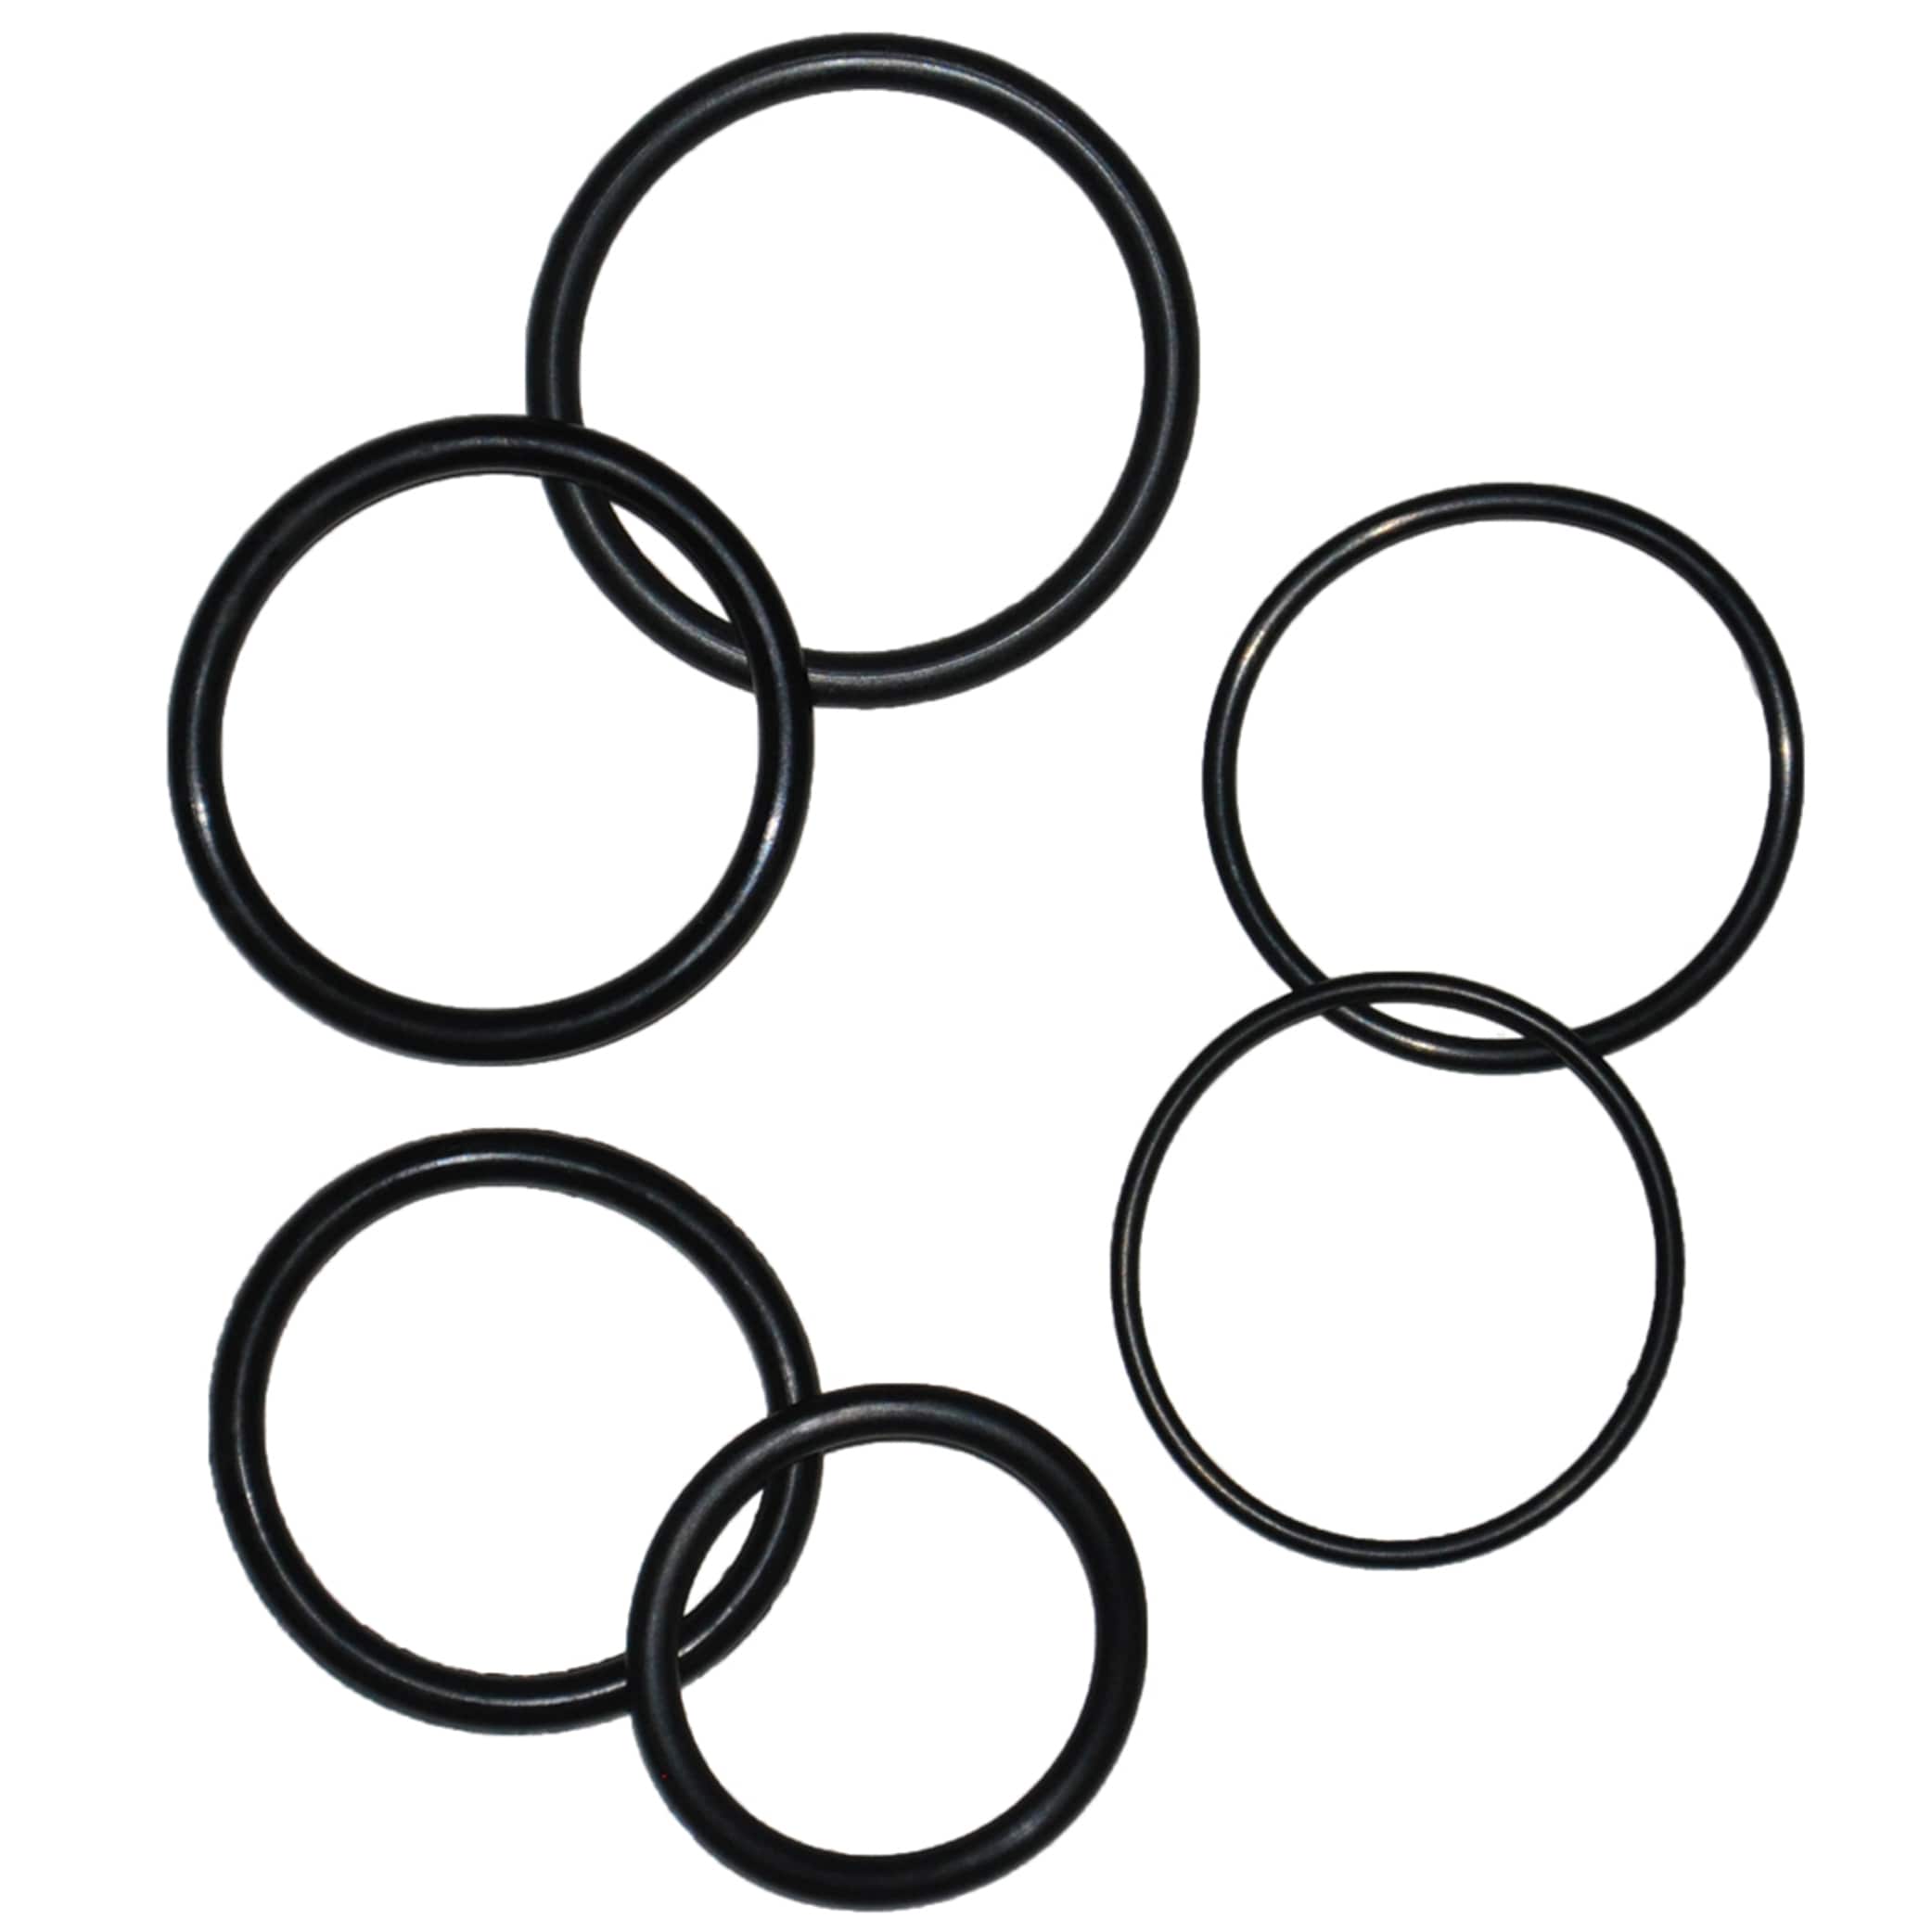 O-rings: materials and surface technology make the difference | Datwyler